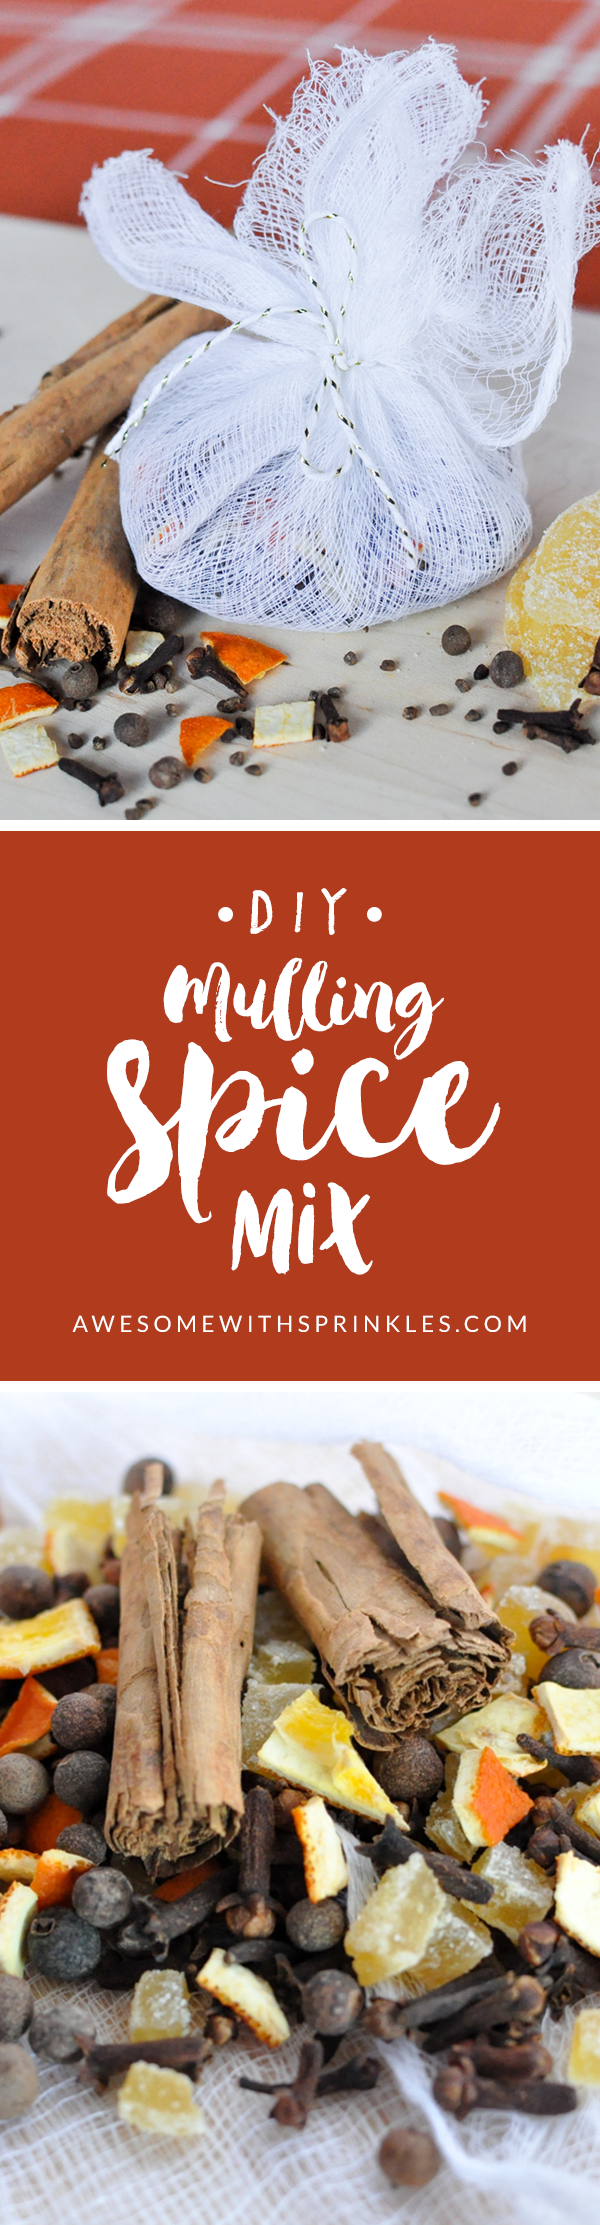 DIY Best Mulling Spice Mix | Awesome with Sprinkles